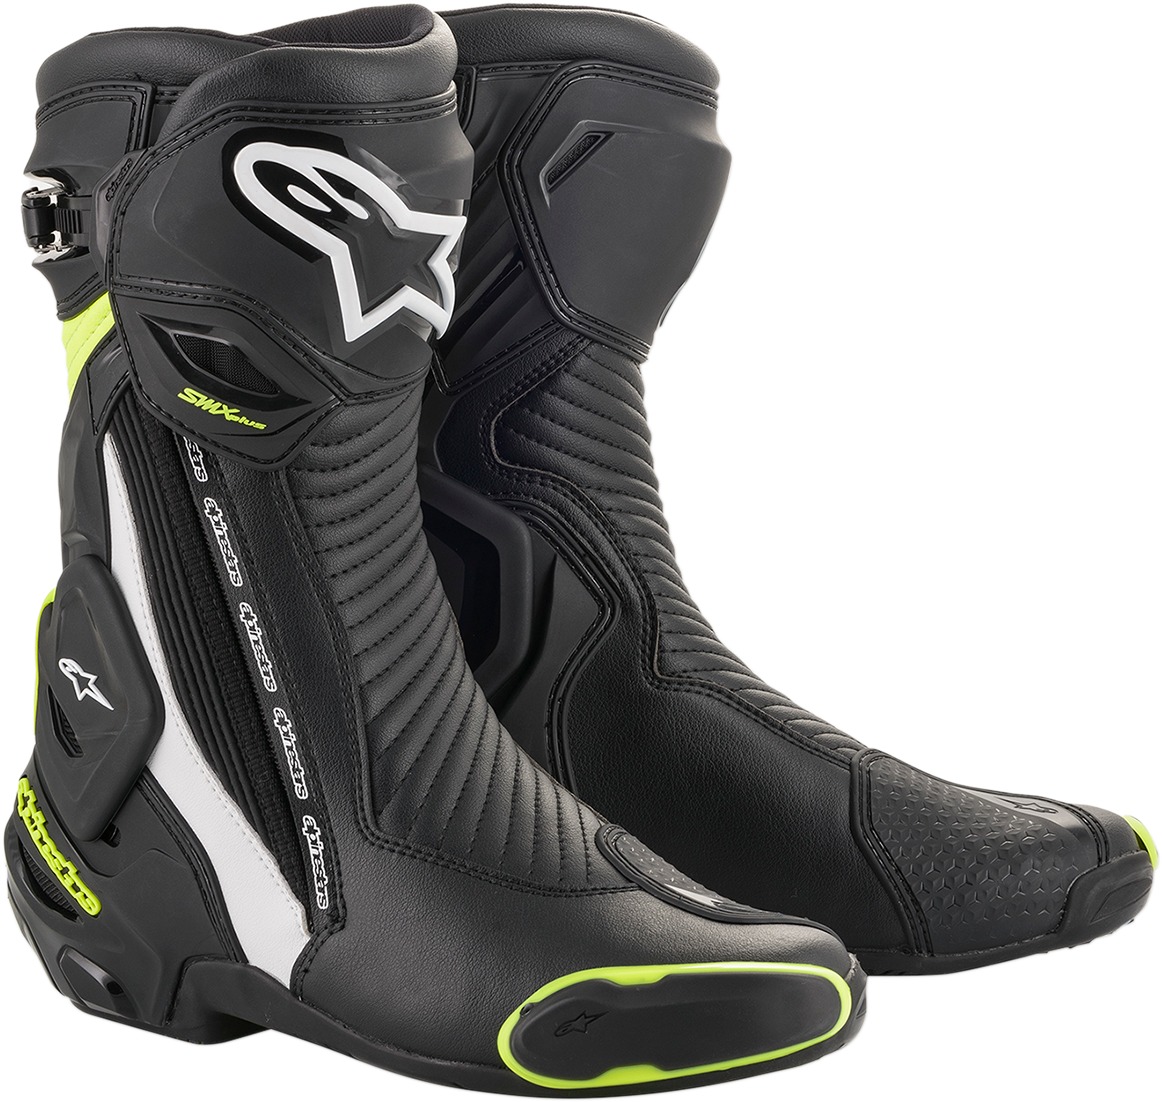 SMX Plus Street Riding Boots Black/White/Yellow US 9 - Click Image to Close